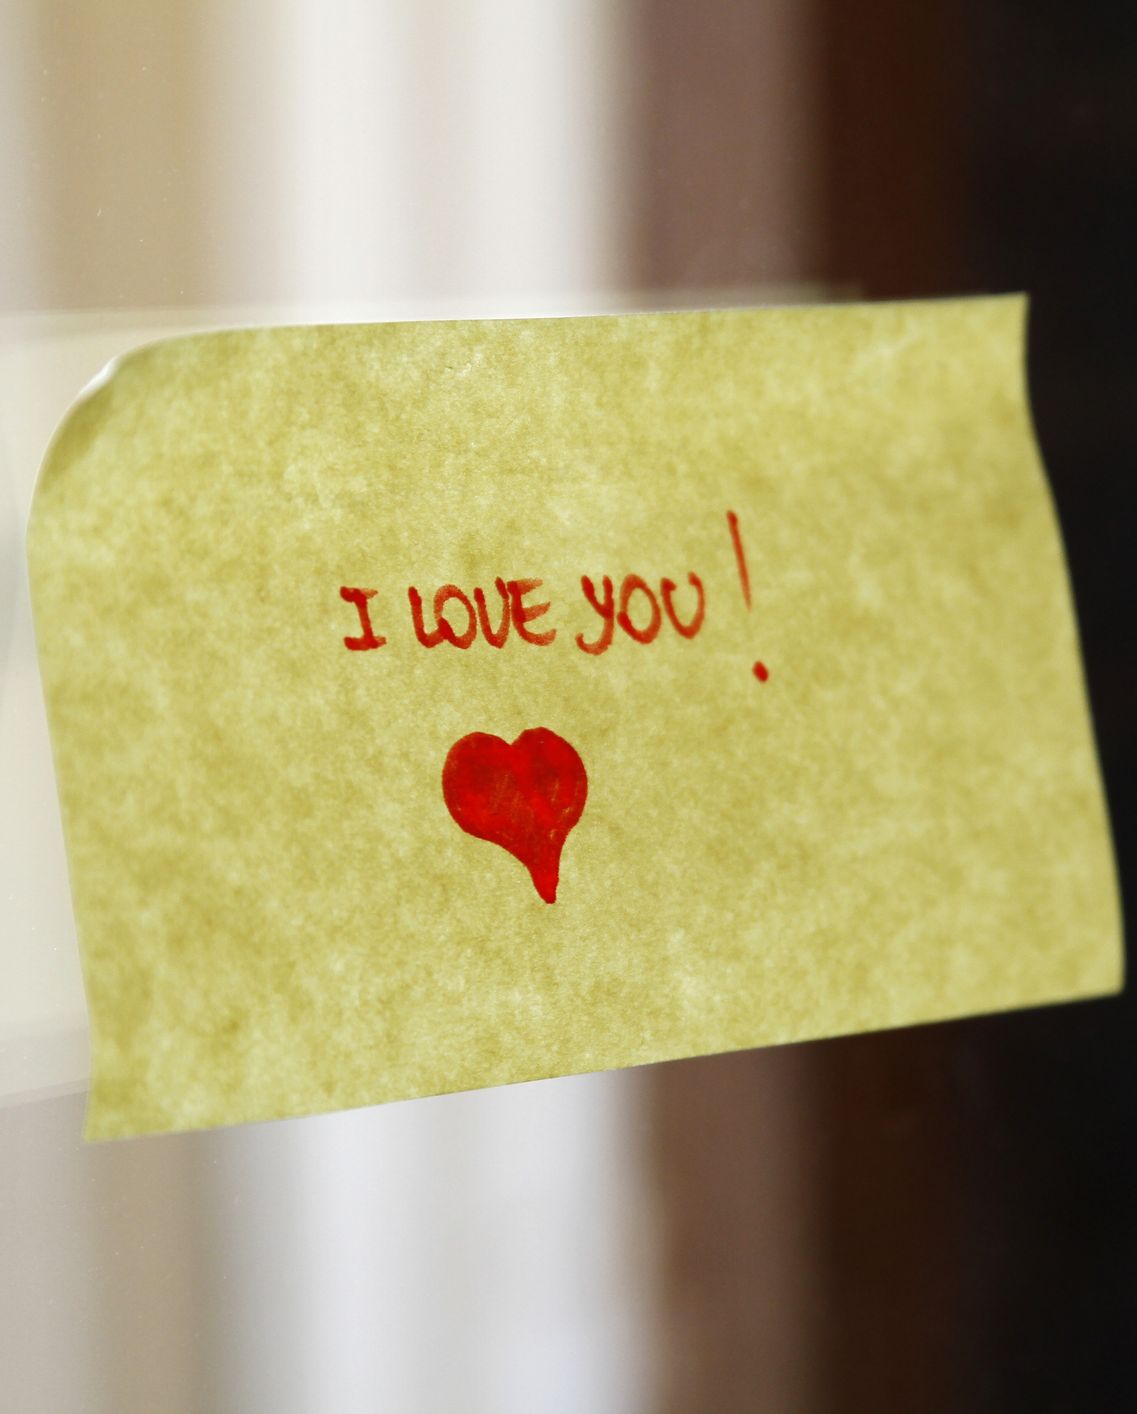 Amazing Collection of Full 4K “I Love You” Images – Over 999+ images